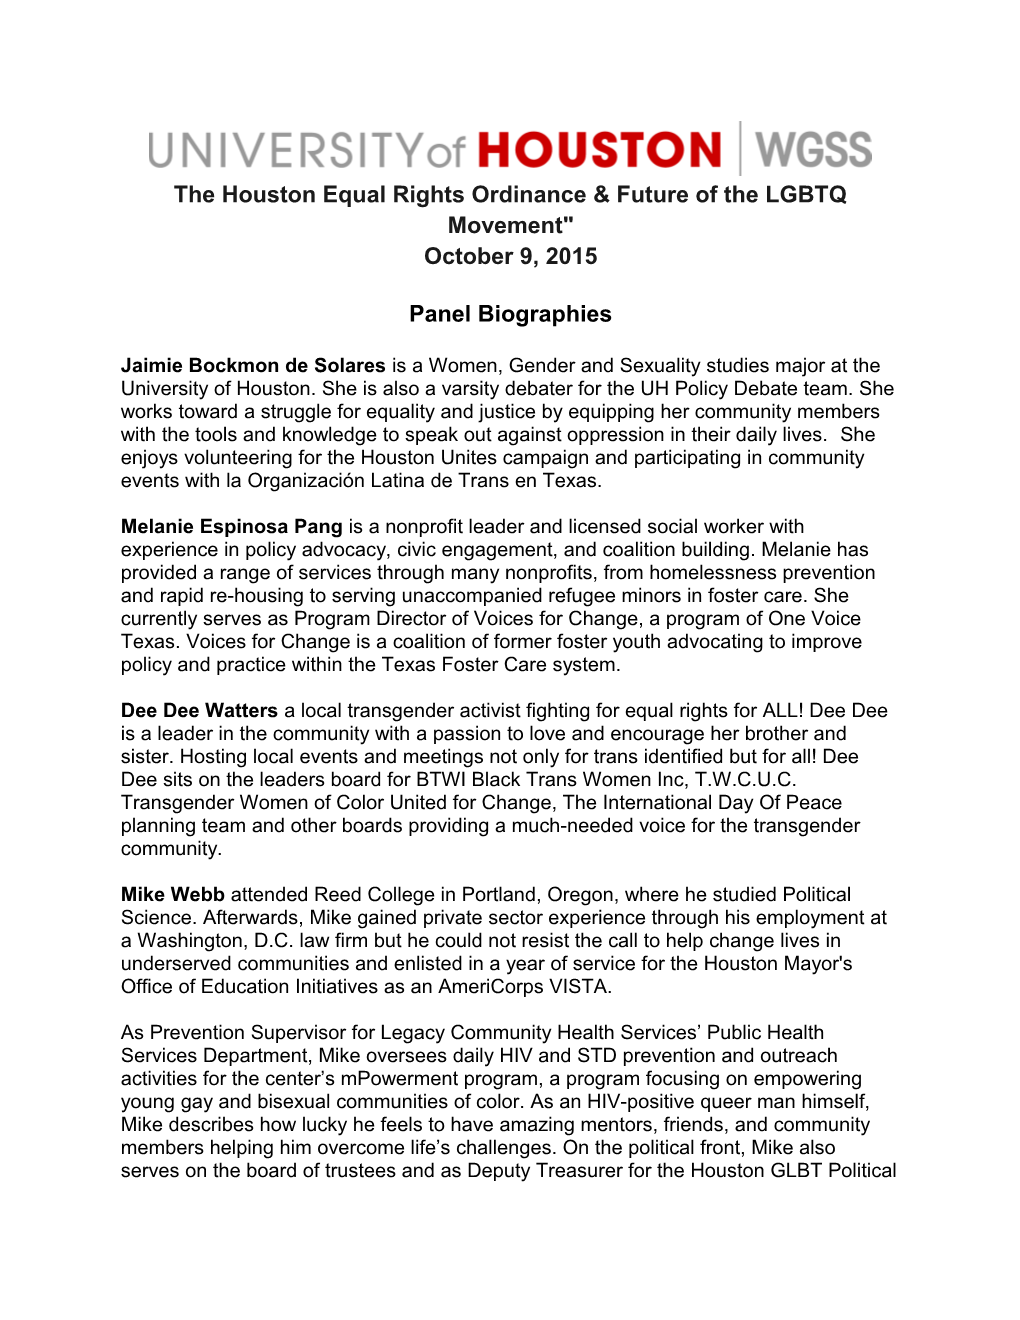 The Houston Equal Rights Ordinance & Future of the LGBTQ Movement